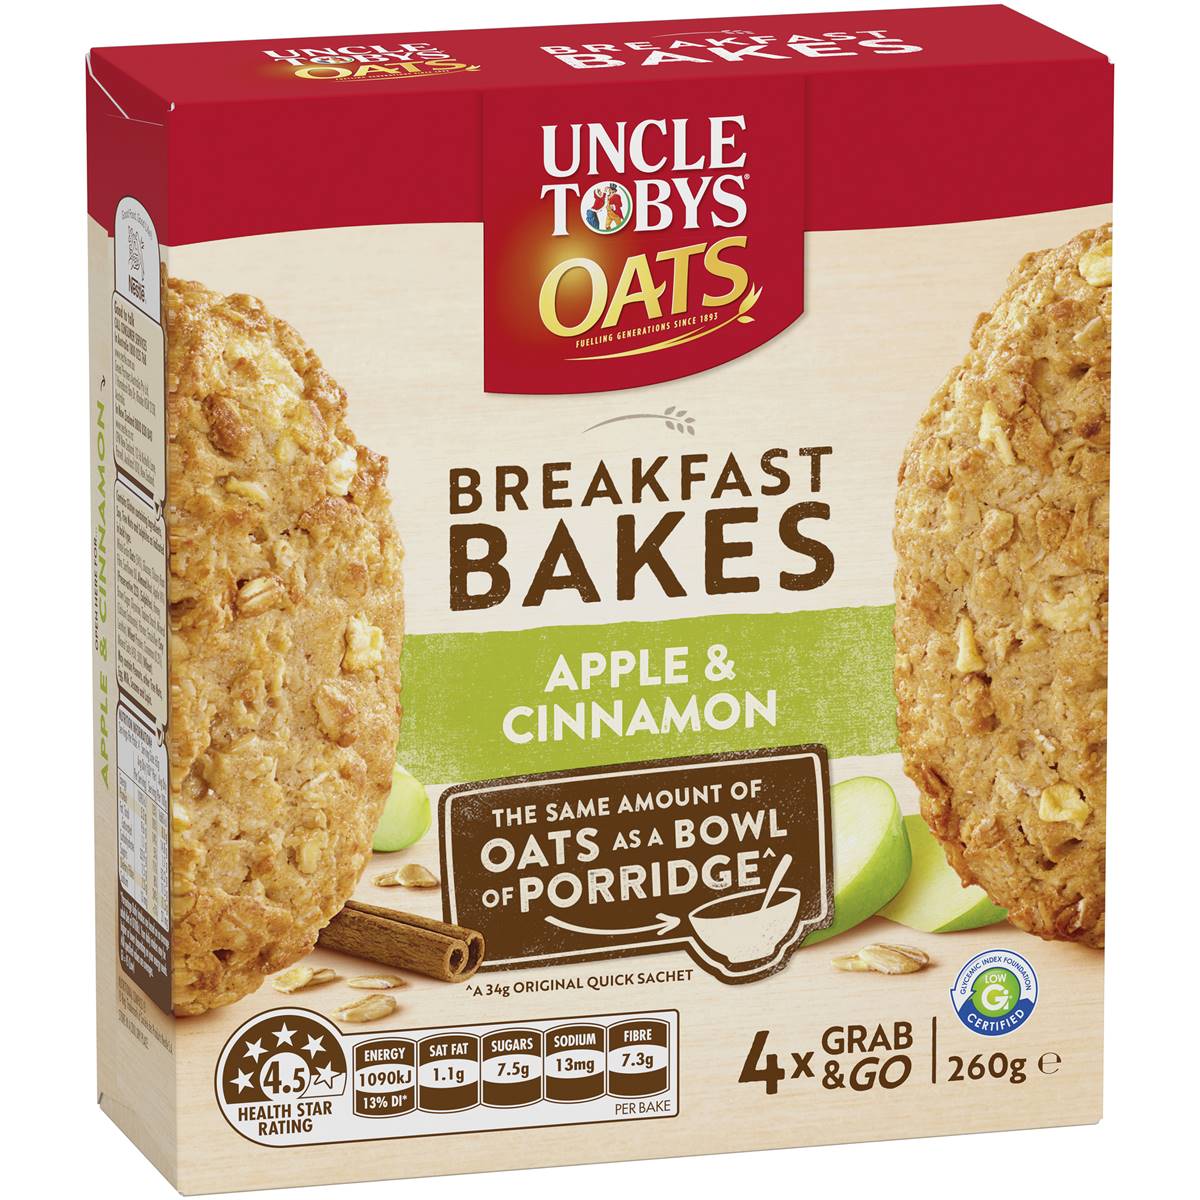 Calories in Uncle Tobys Oats Breakfast Bakes Cereal Bar Apple & Cinnamon